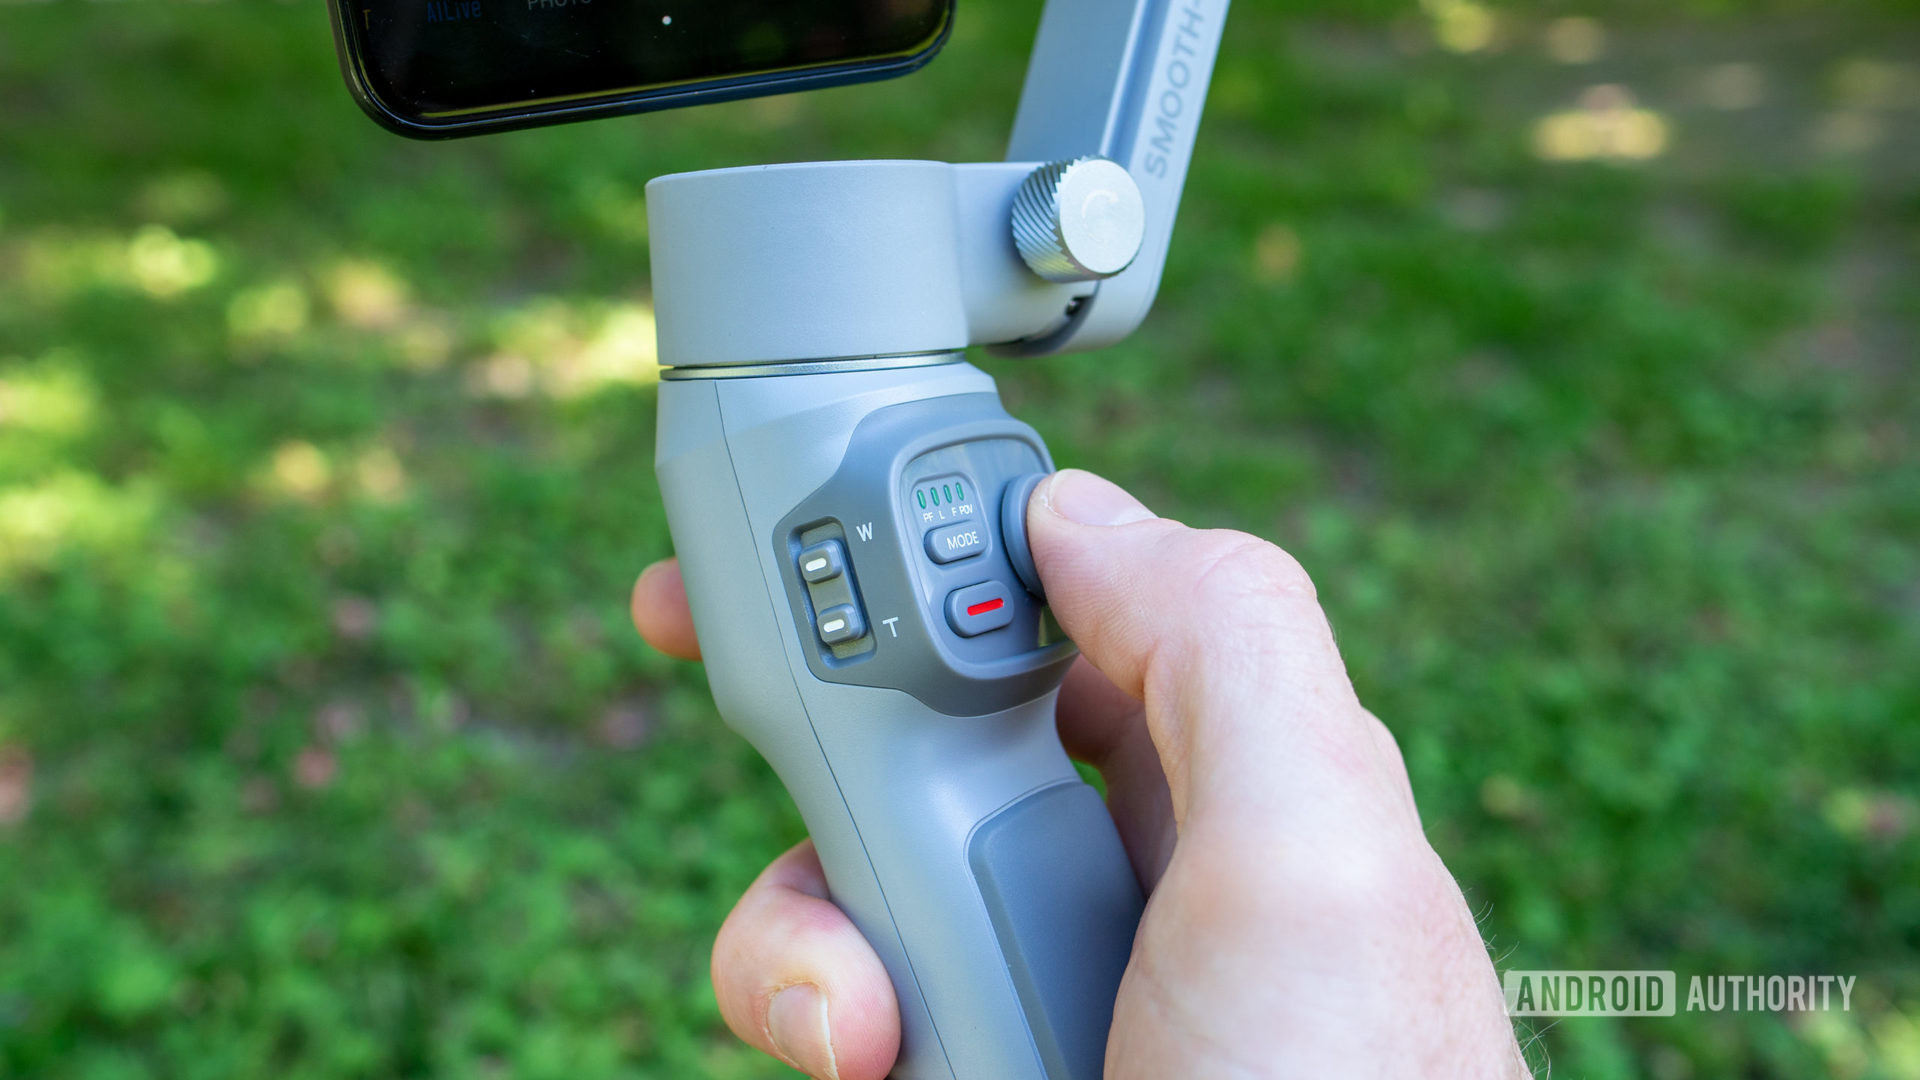 The ZHIYUN Smooth-Q3 controls with hand.